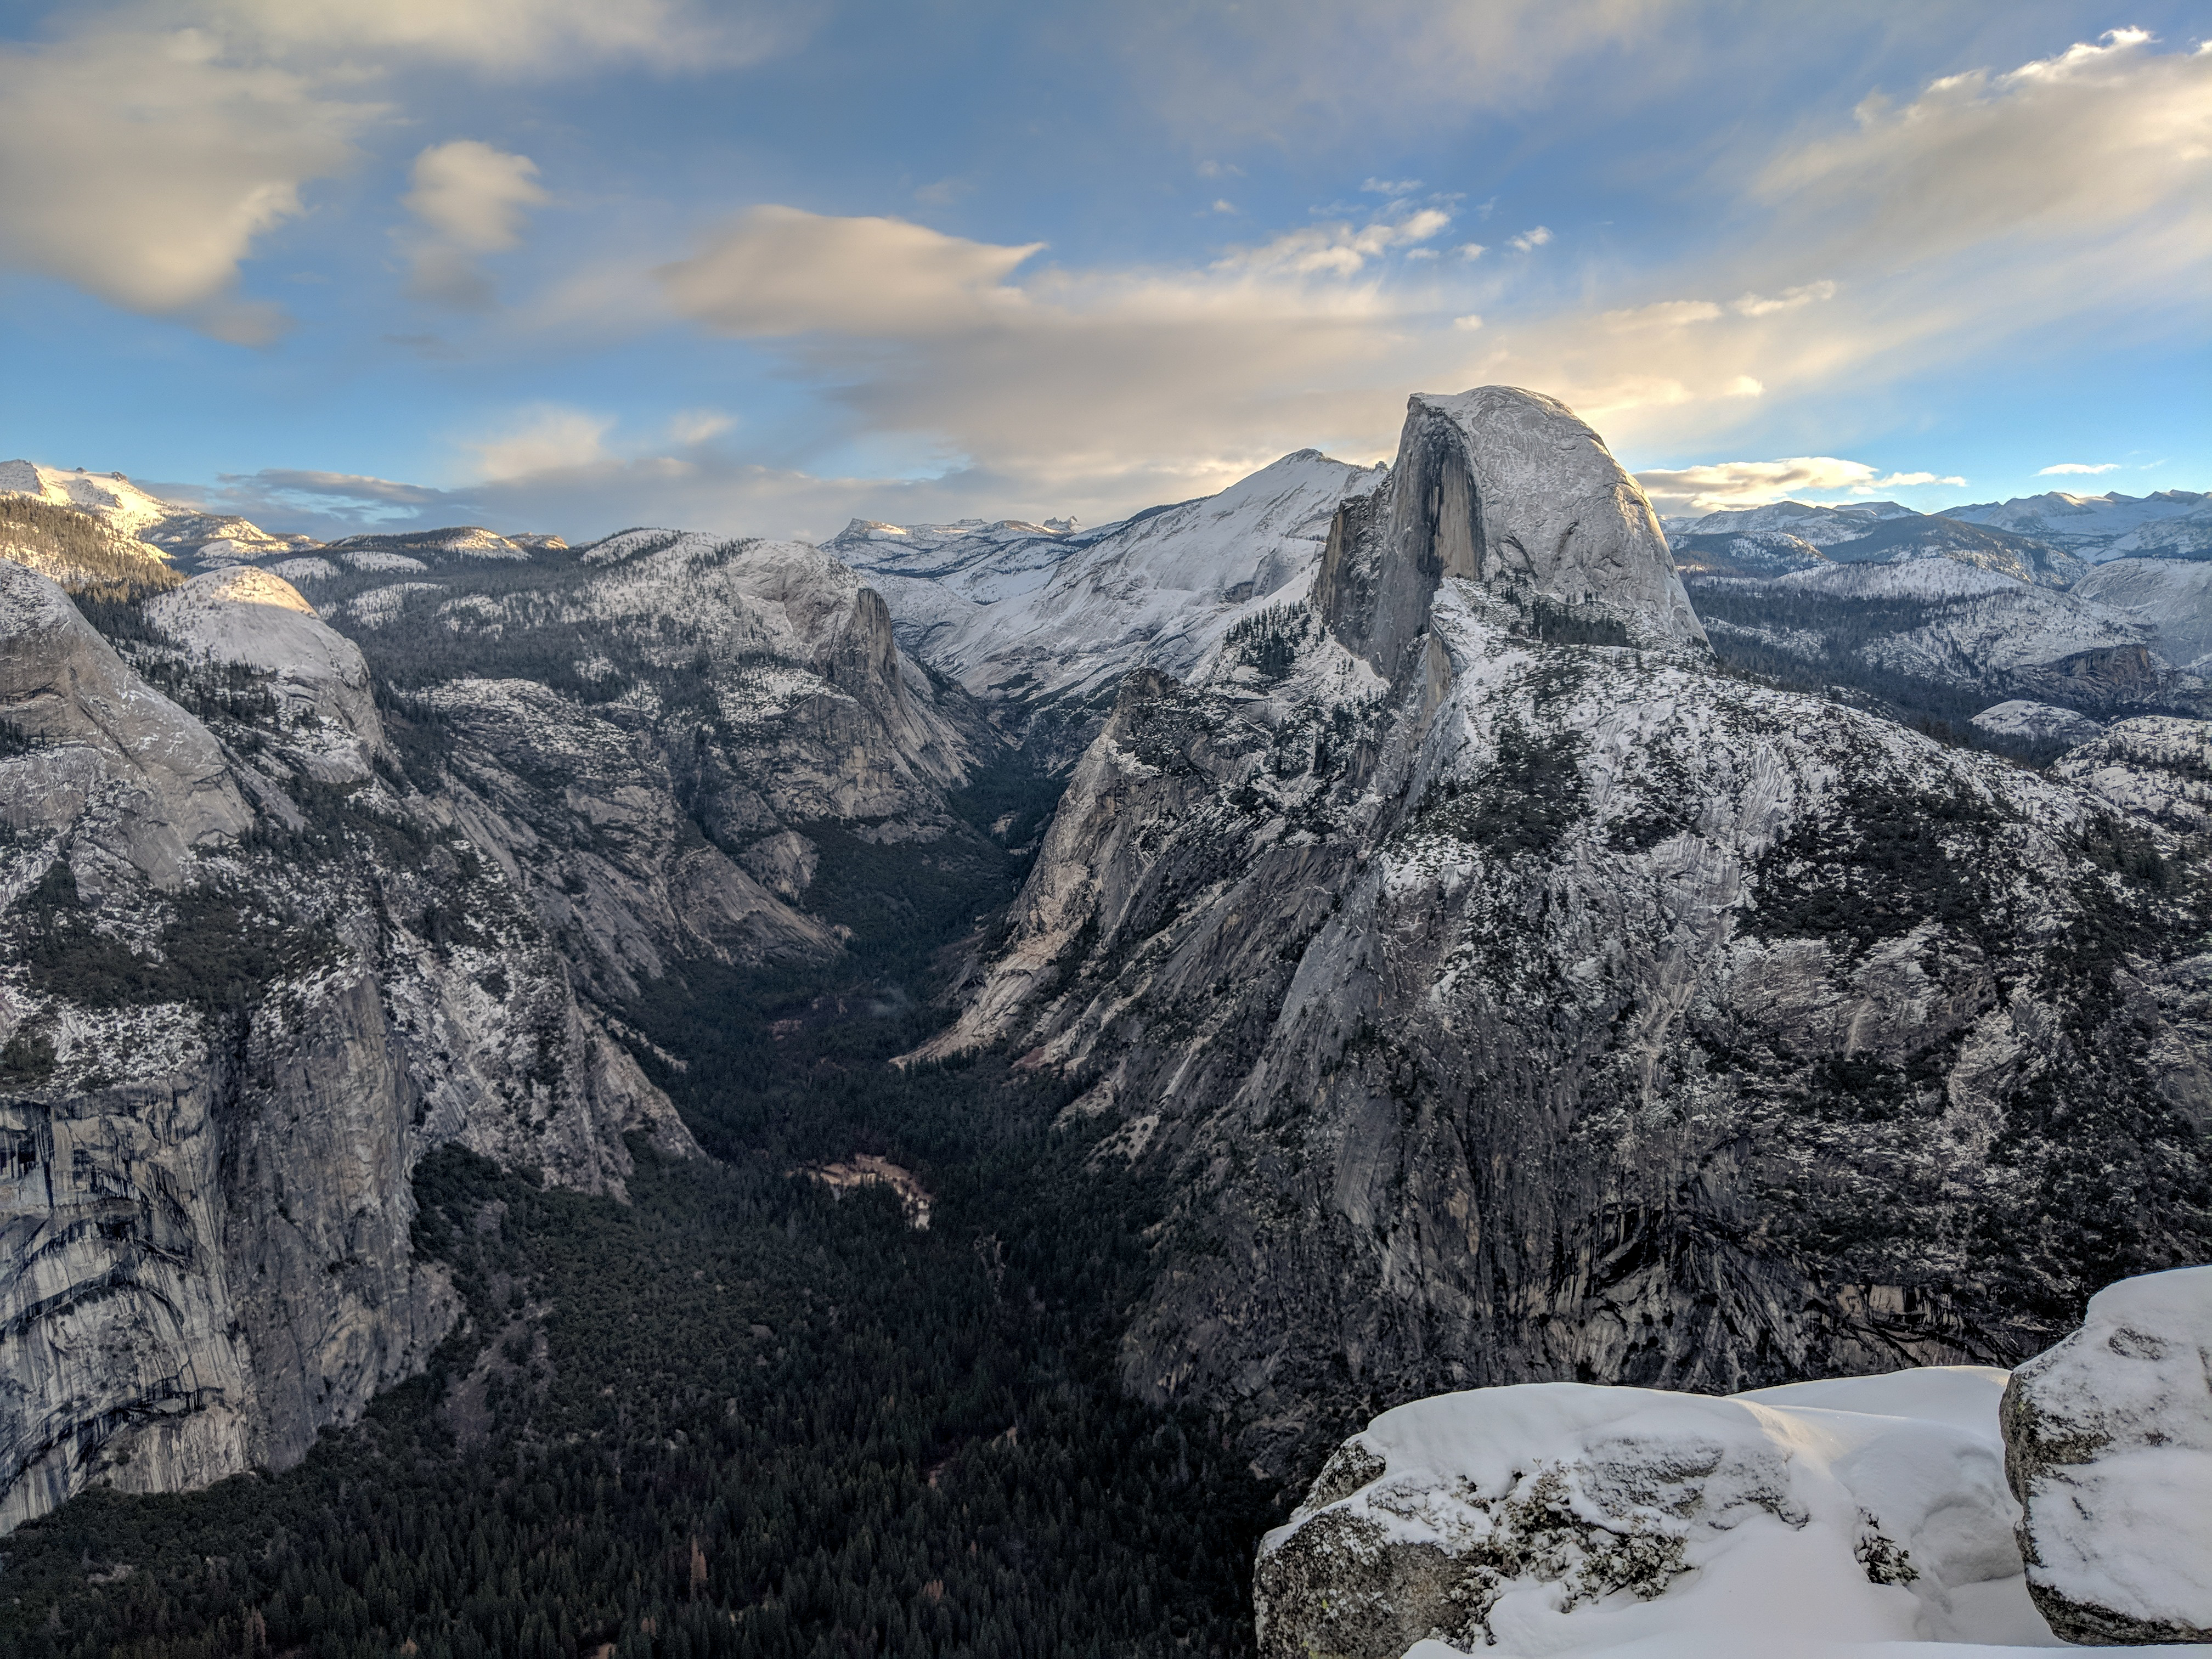 View of Yosemite Valley from Glacier Point